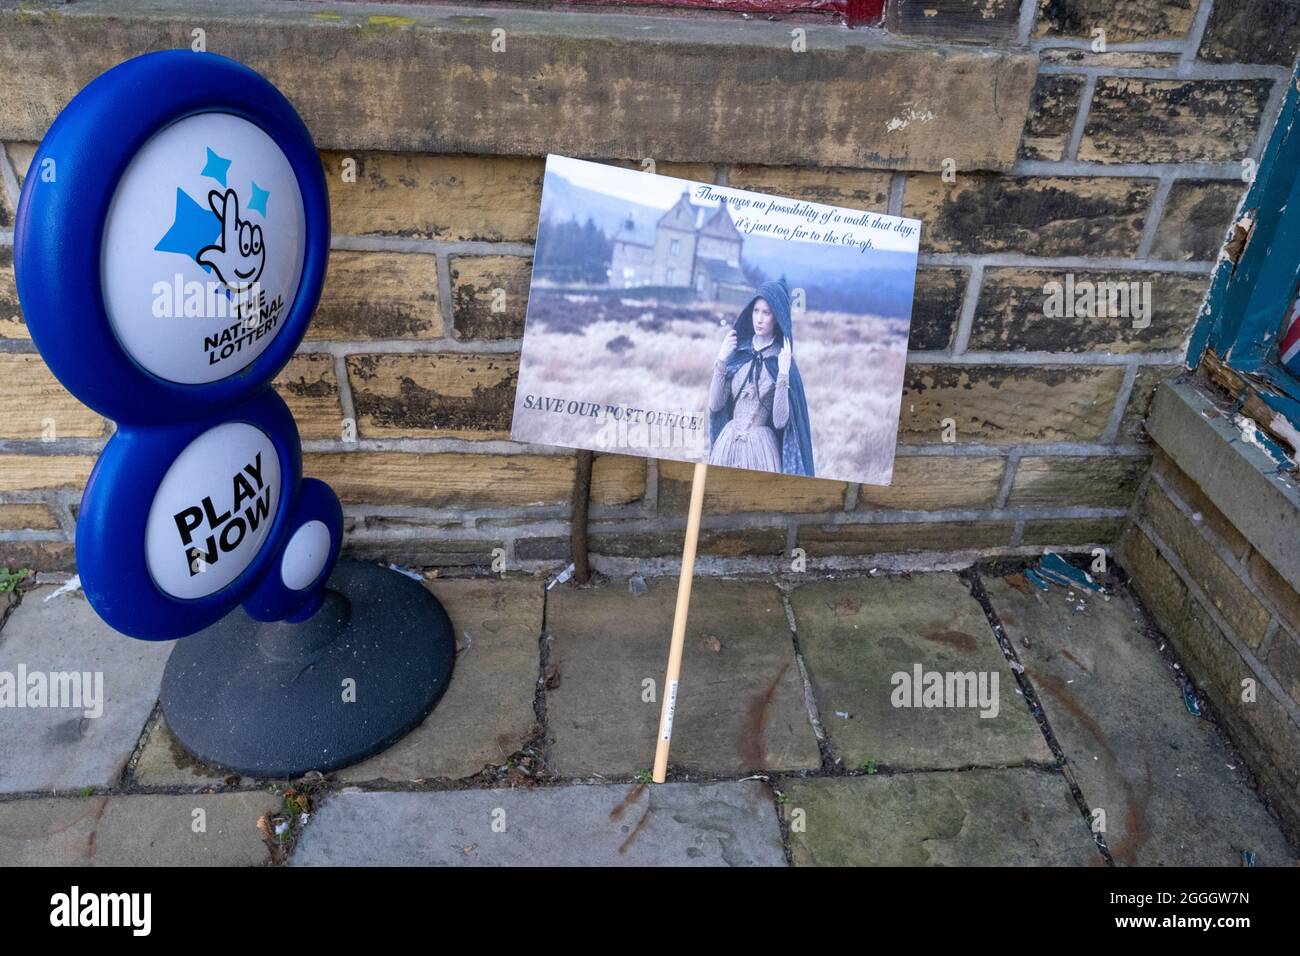 August 2021, Haworth, West Yorkshire, signs of the protest by local residents over the proposed closure of the sub post office causing concern Stock Photo